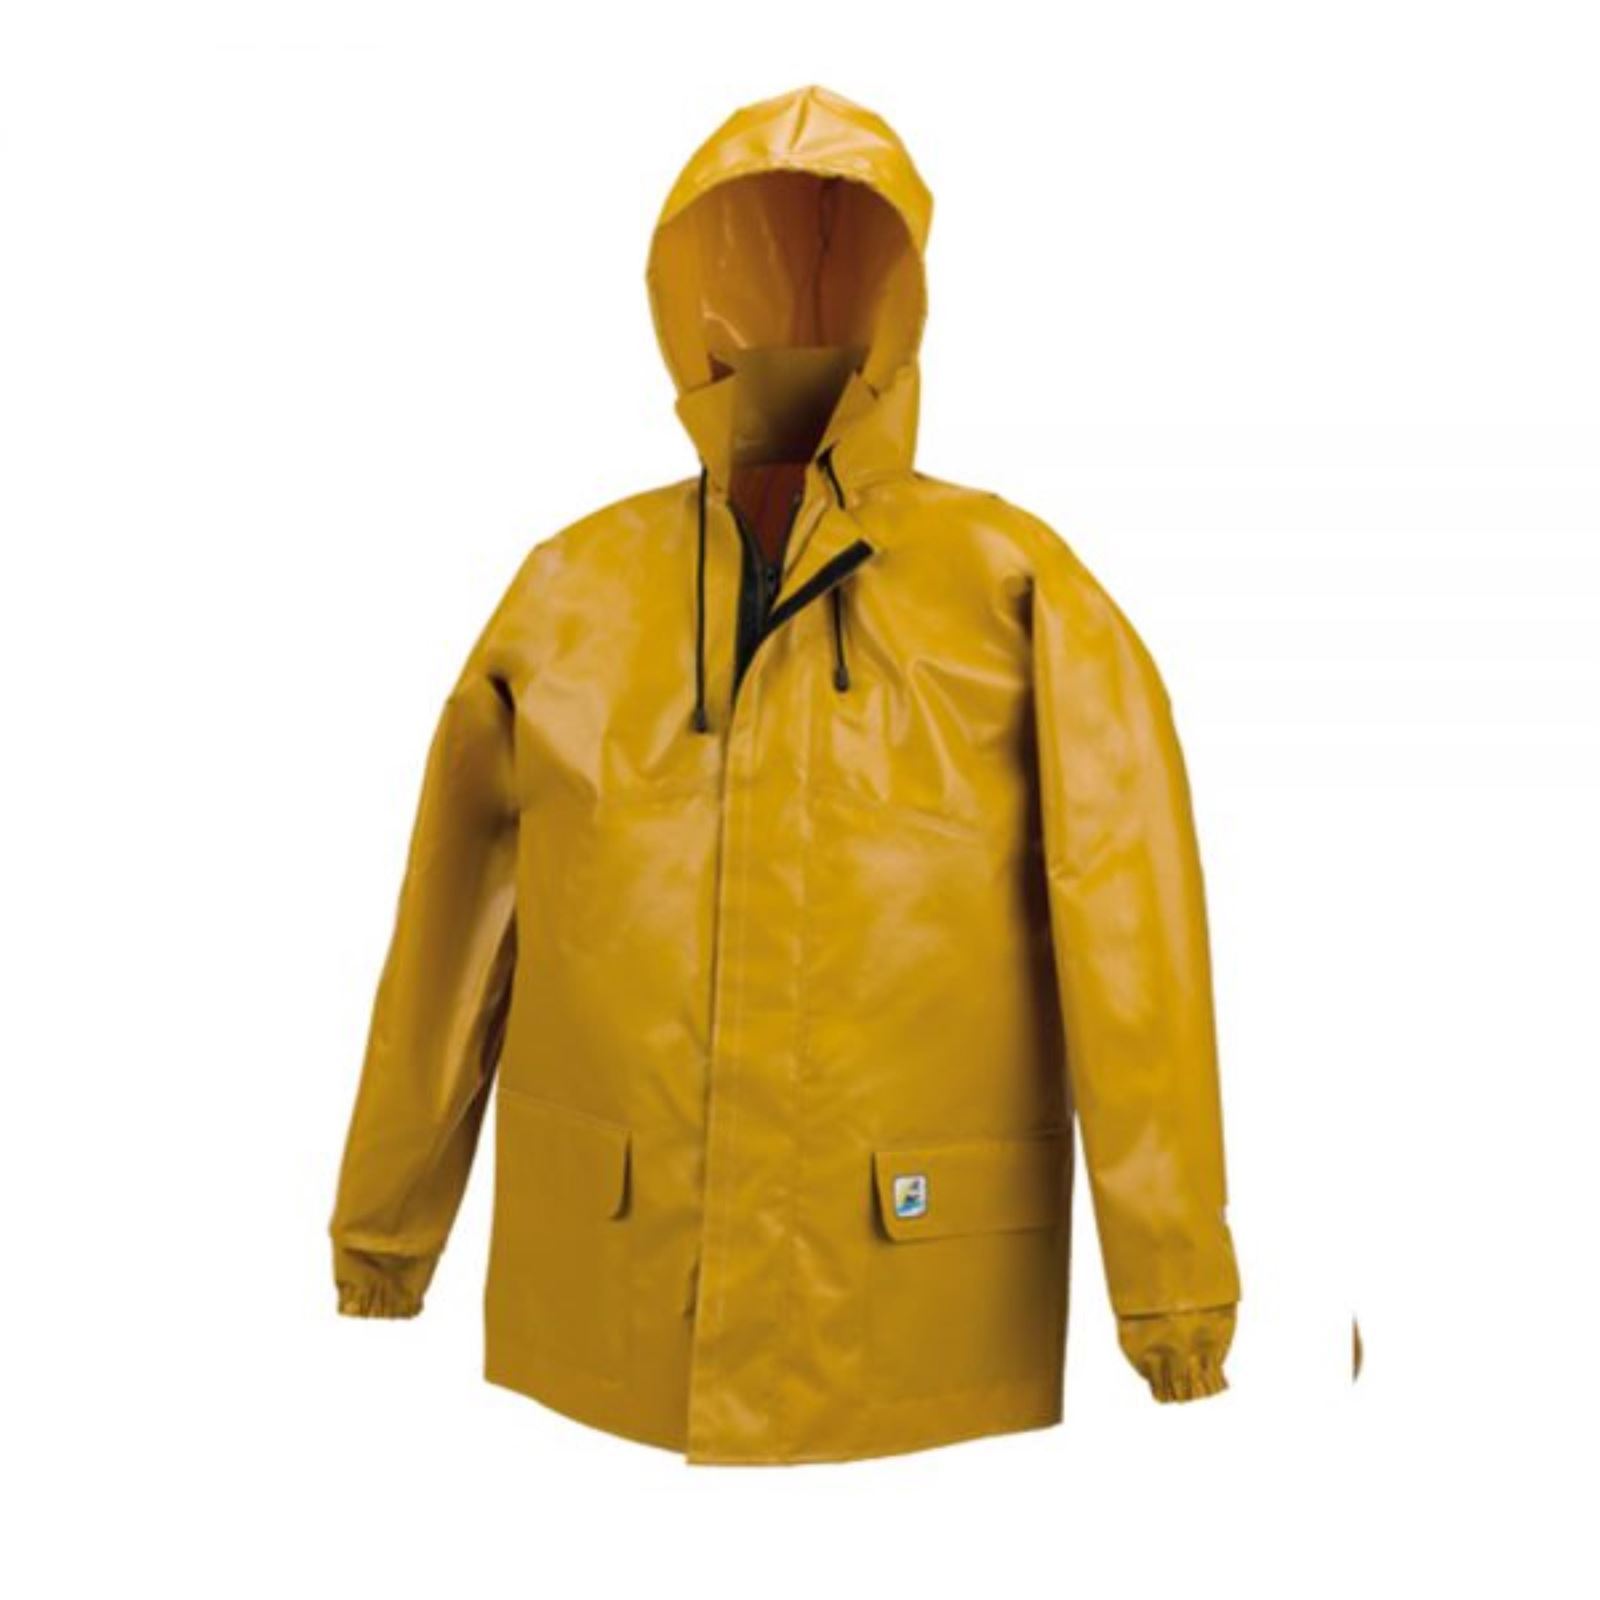 Chaqueta impermeable - Ropa impermeable